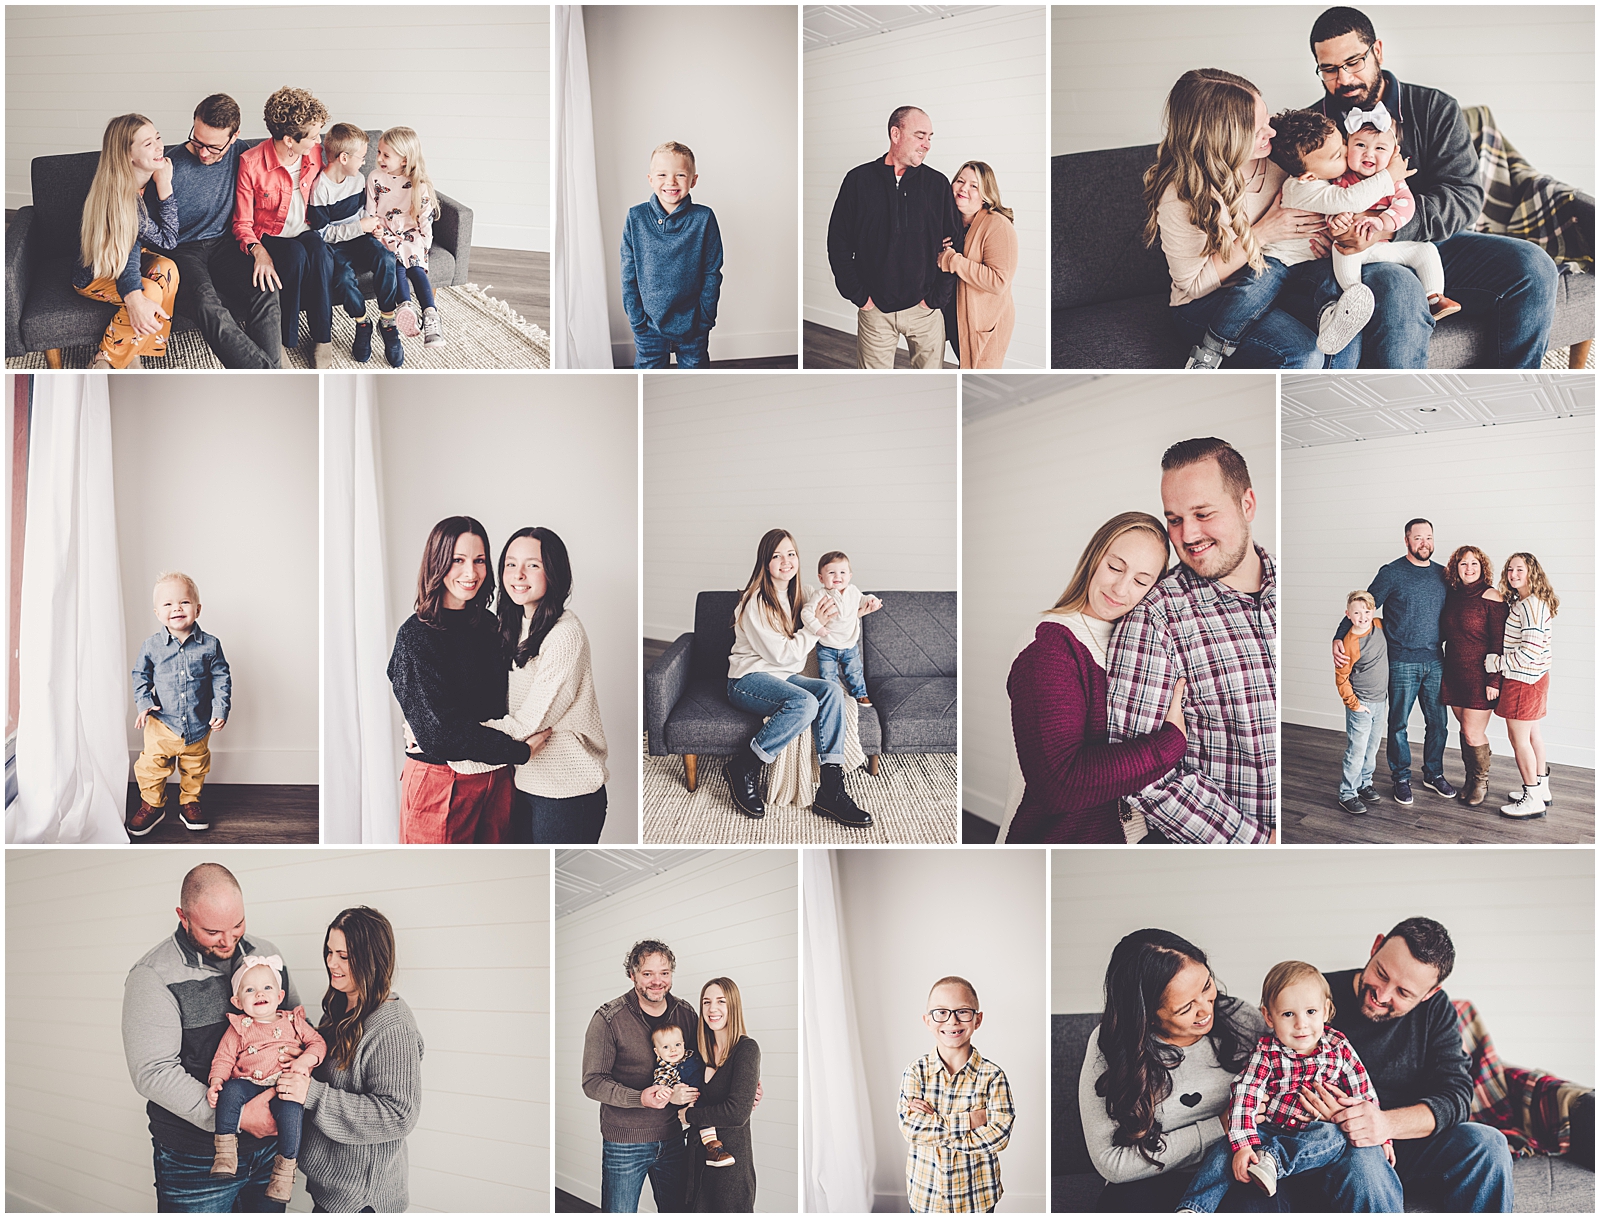 Fall mini sessions at the natural light Studio 388 owned by Kara Evans Photographer in Kankakee, Illinois.